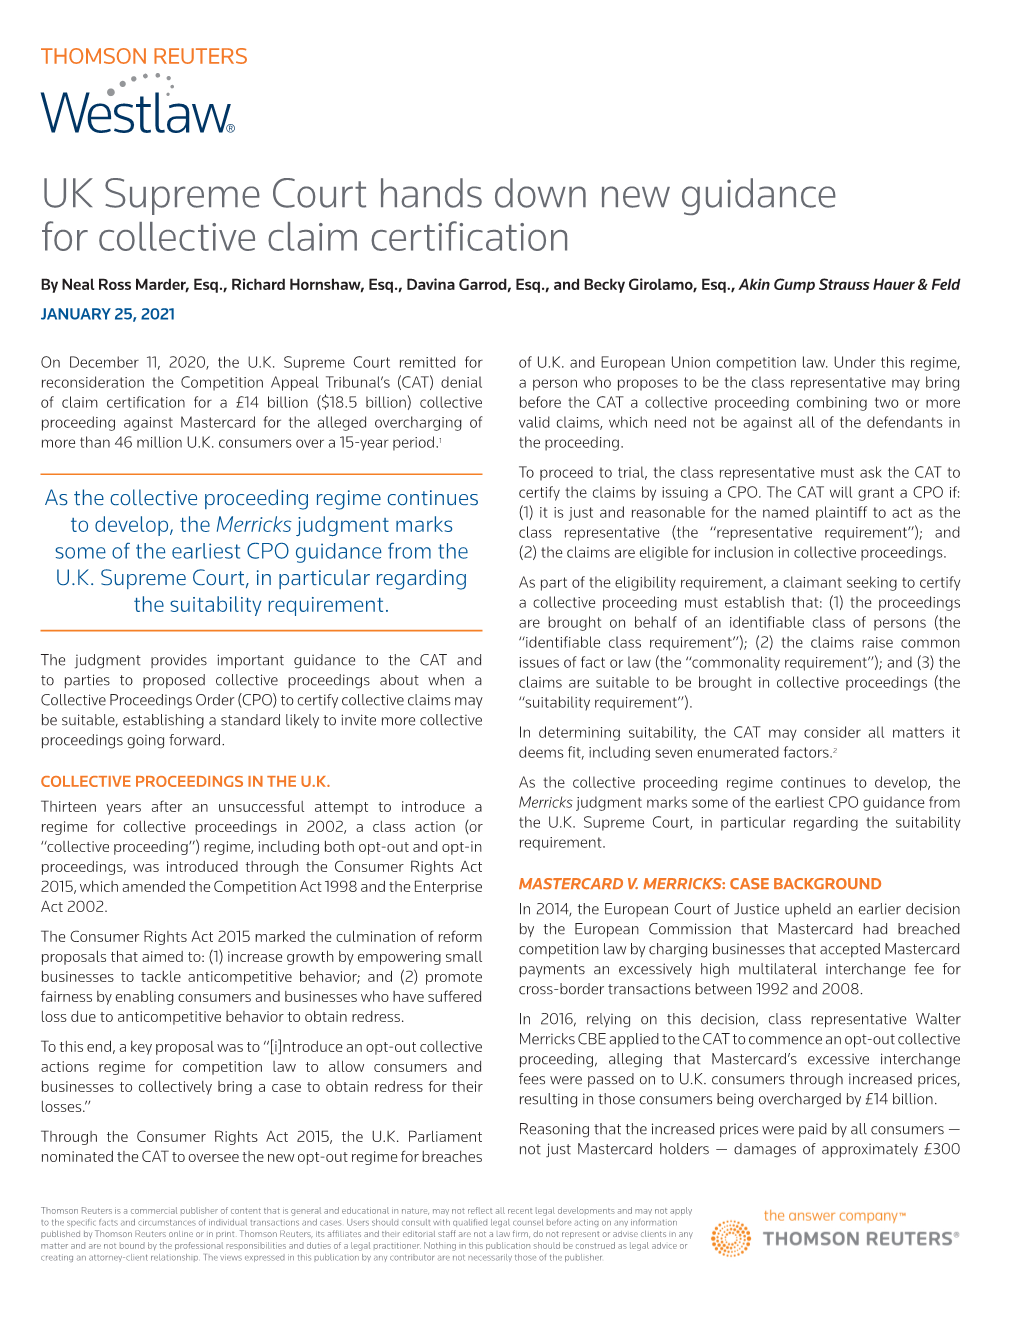 UK Supreme Court Hands Down New Guidance for Collective Claim